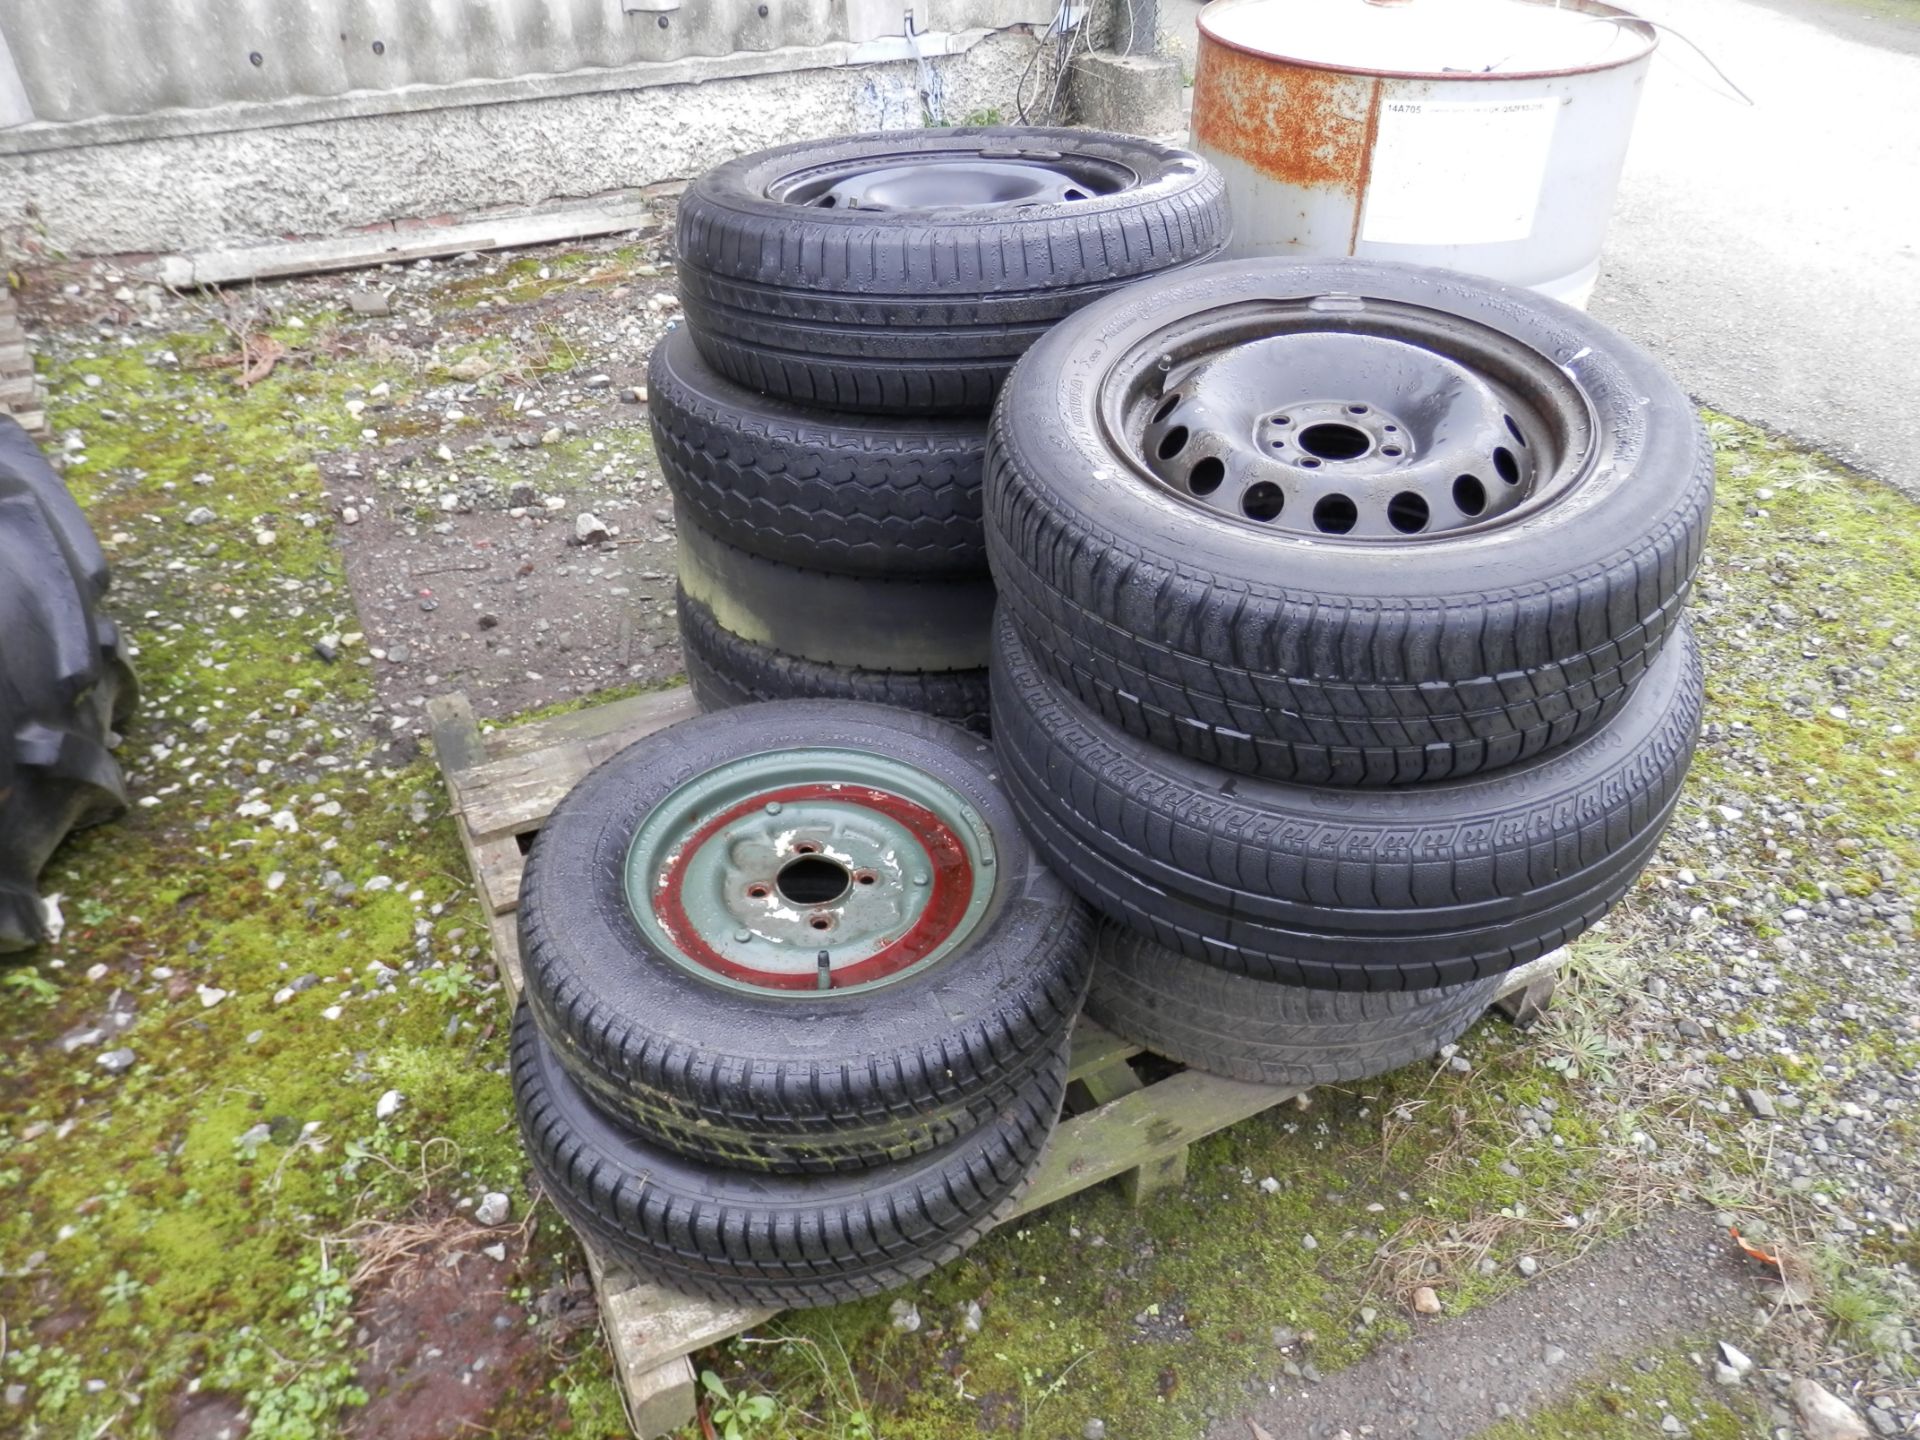 85 + ASSORTED LORRY, CAR & TRAILER TYRES & WHEELS, AS PICTURED. BUYER TO COLLECT COMPLETE - Image 10 of 10